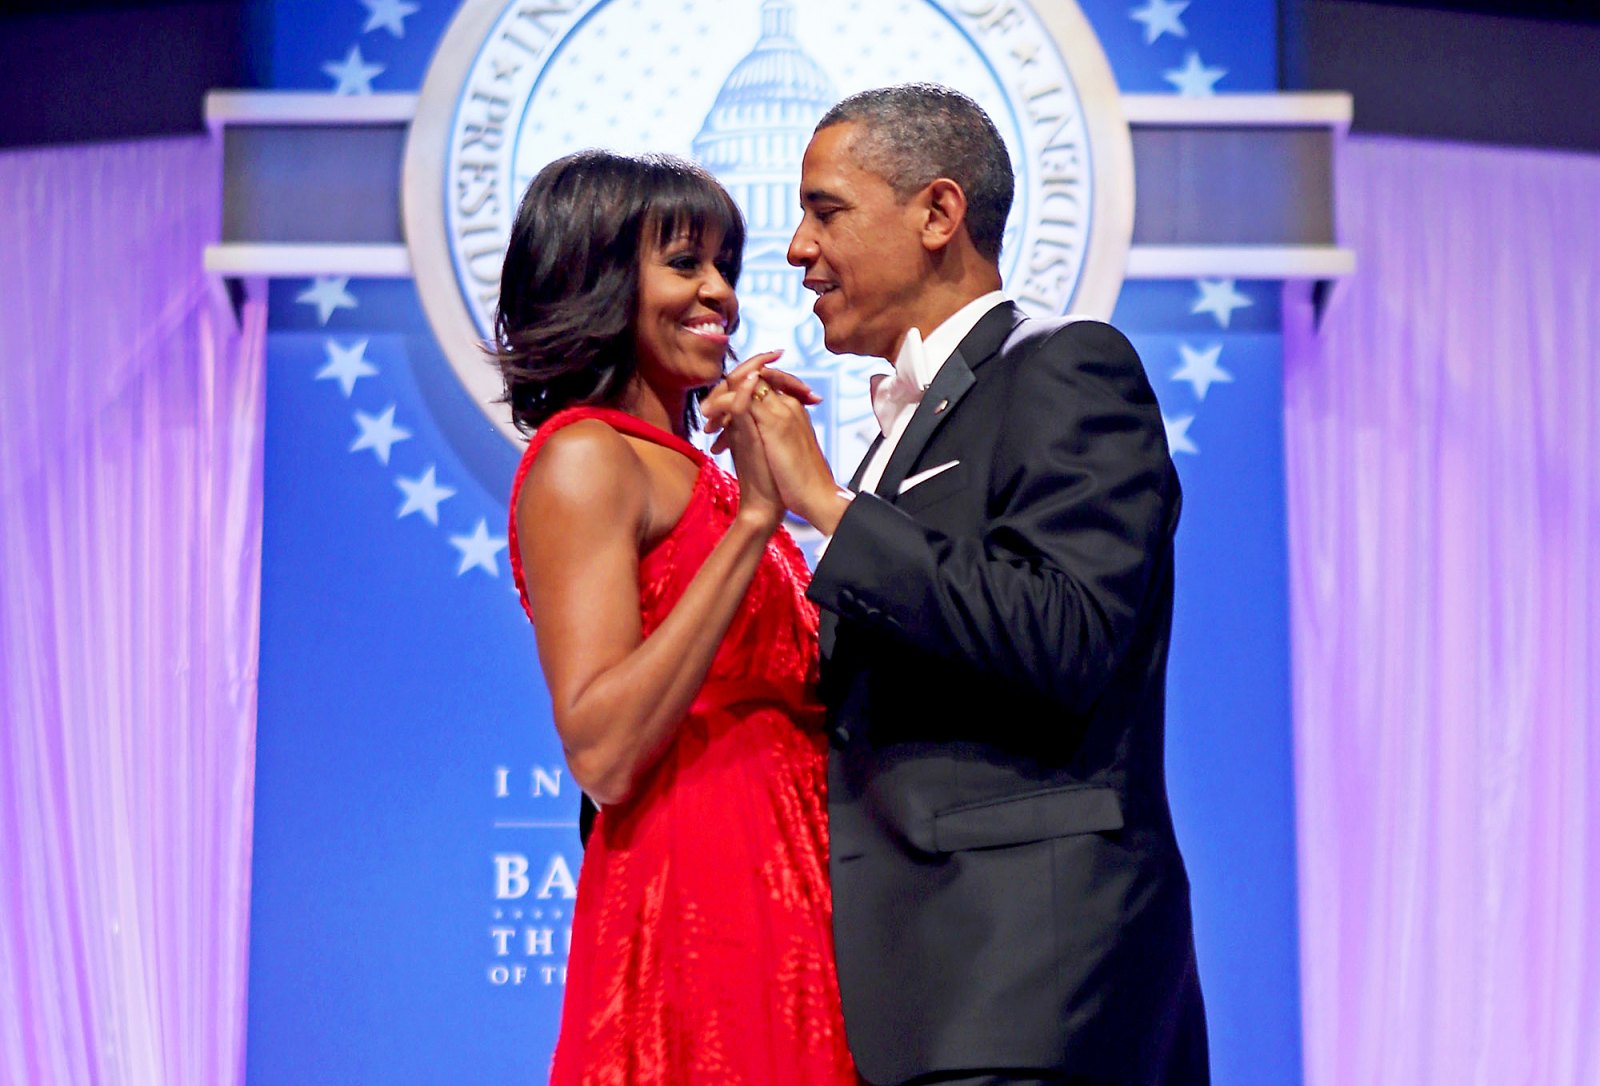 Michelle Obama and Barack Obama dance together during the Inaugural Ball at the Walter Washington Convention Center in Washington, D.C.